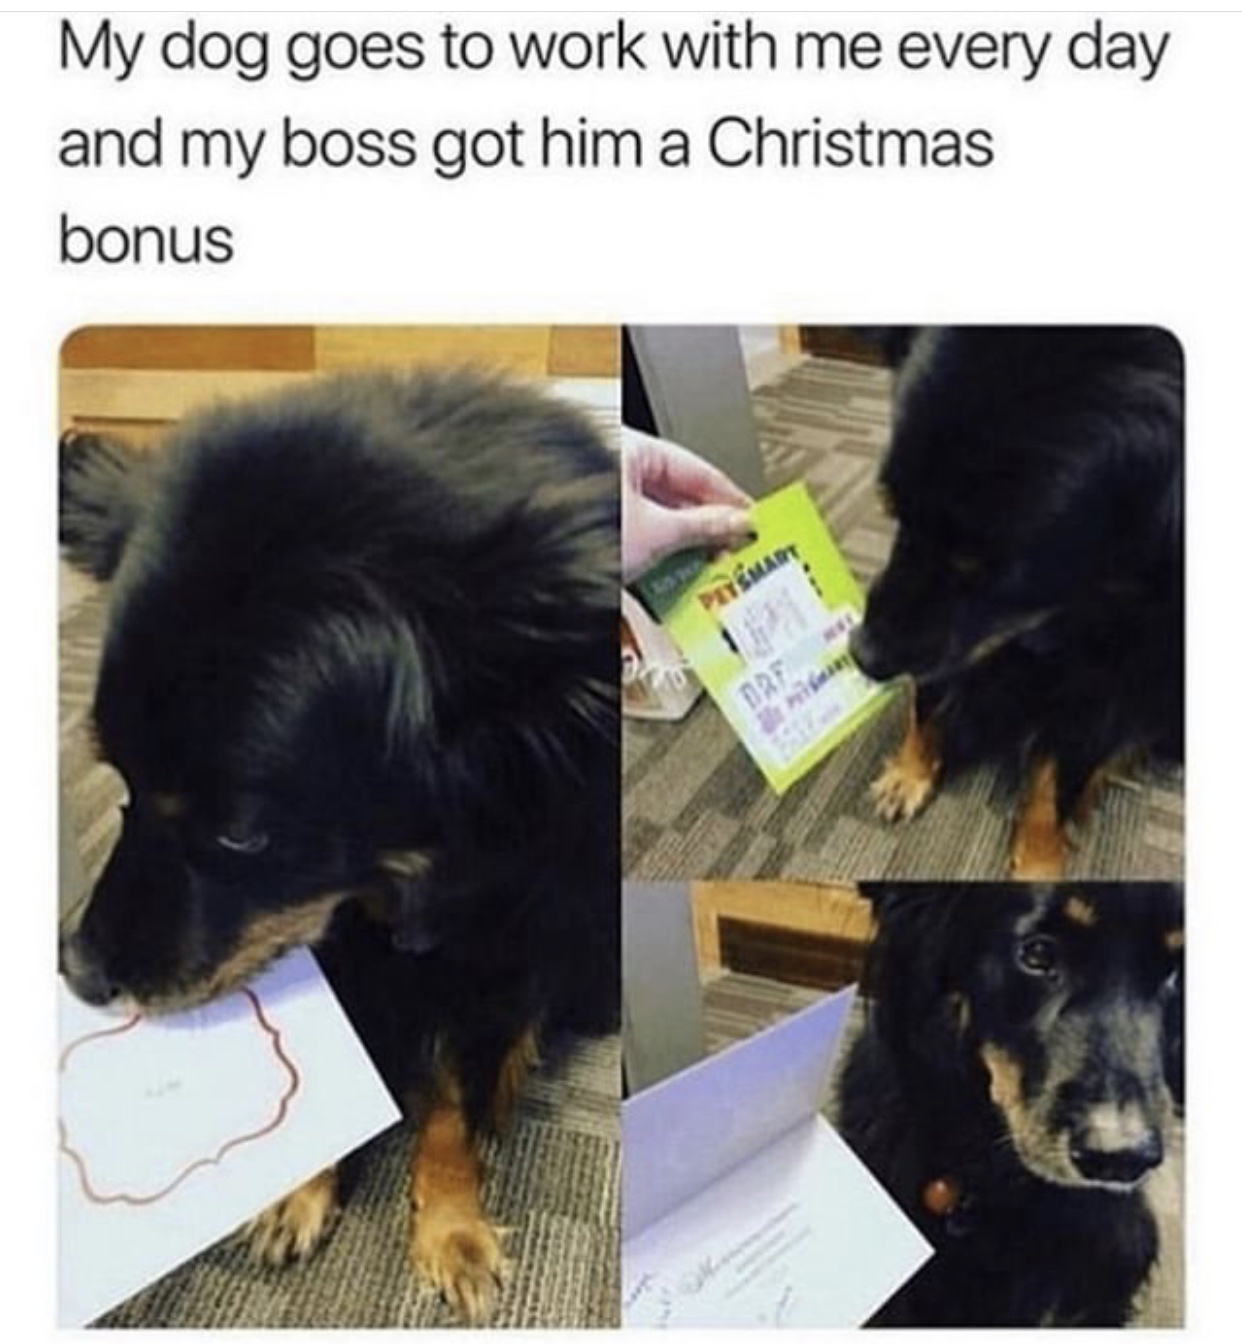 DoggoLingo - My dog goes to work with me every day and my boss got him a Christmas bonus